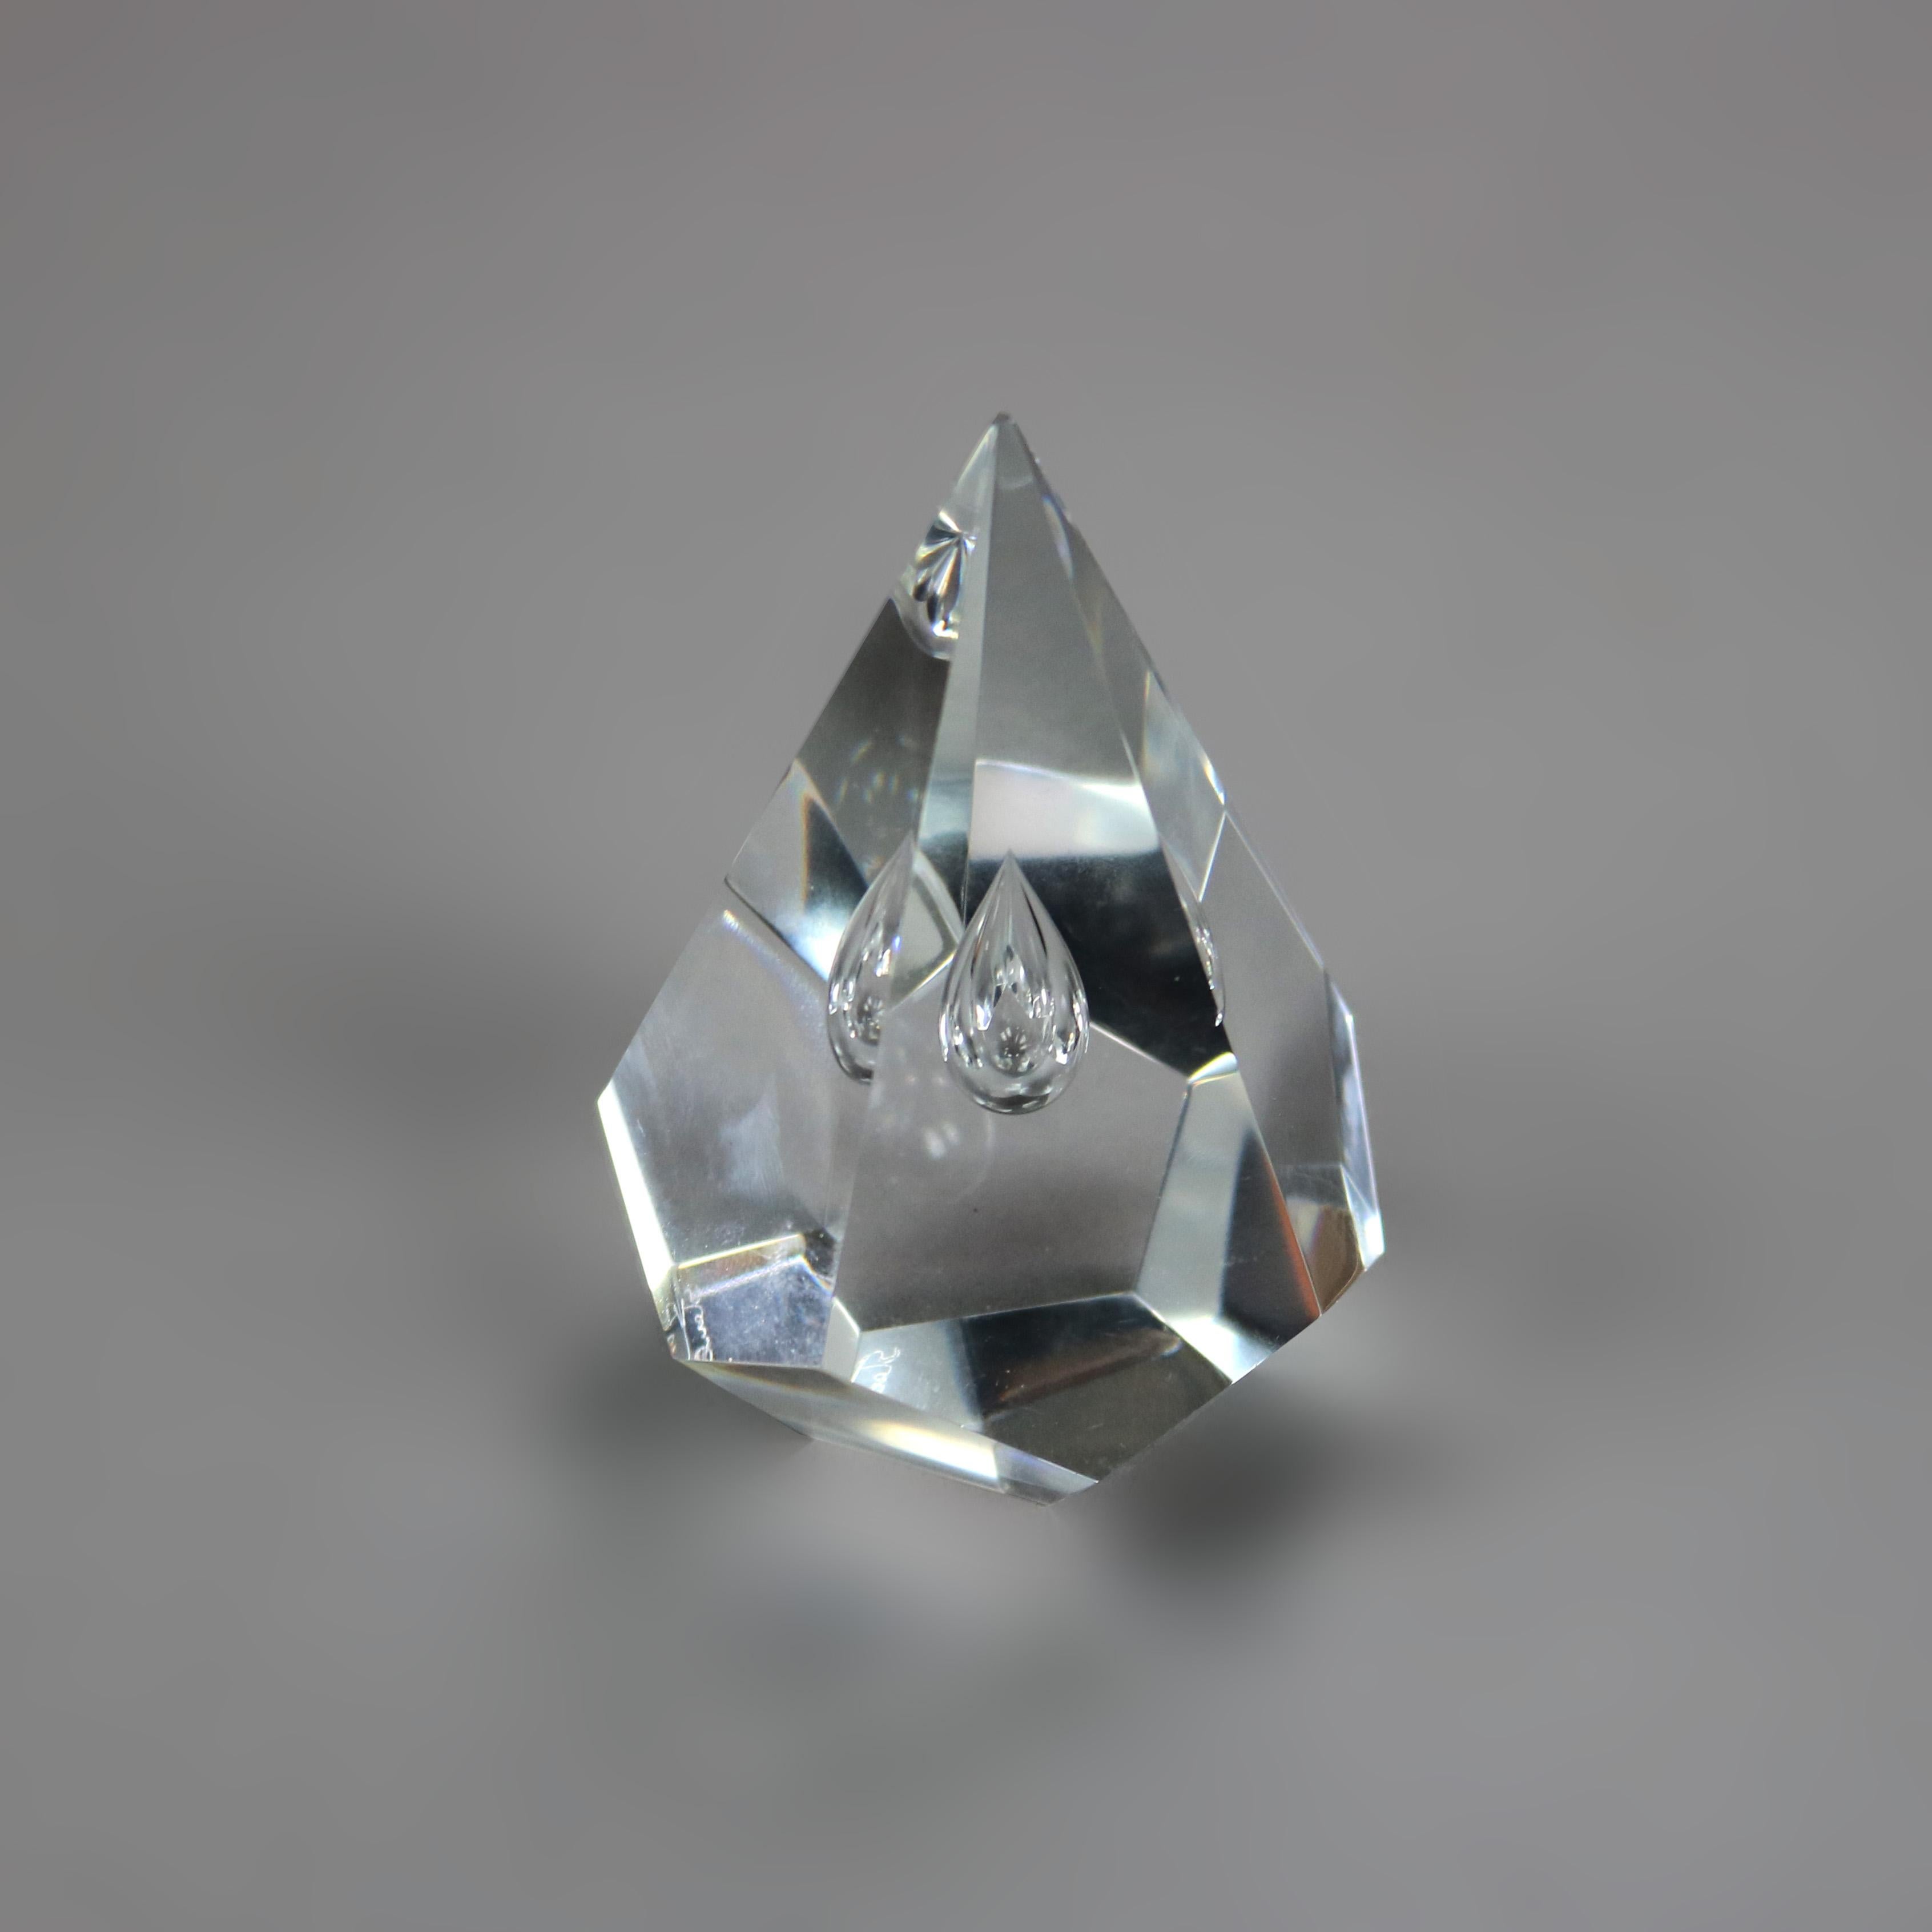 Steuben Glass Pyramid Paperweight, Signed, 20th C 11